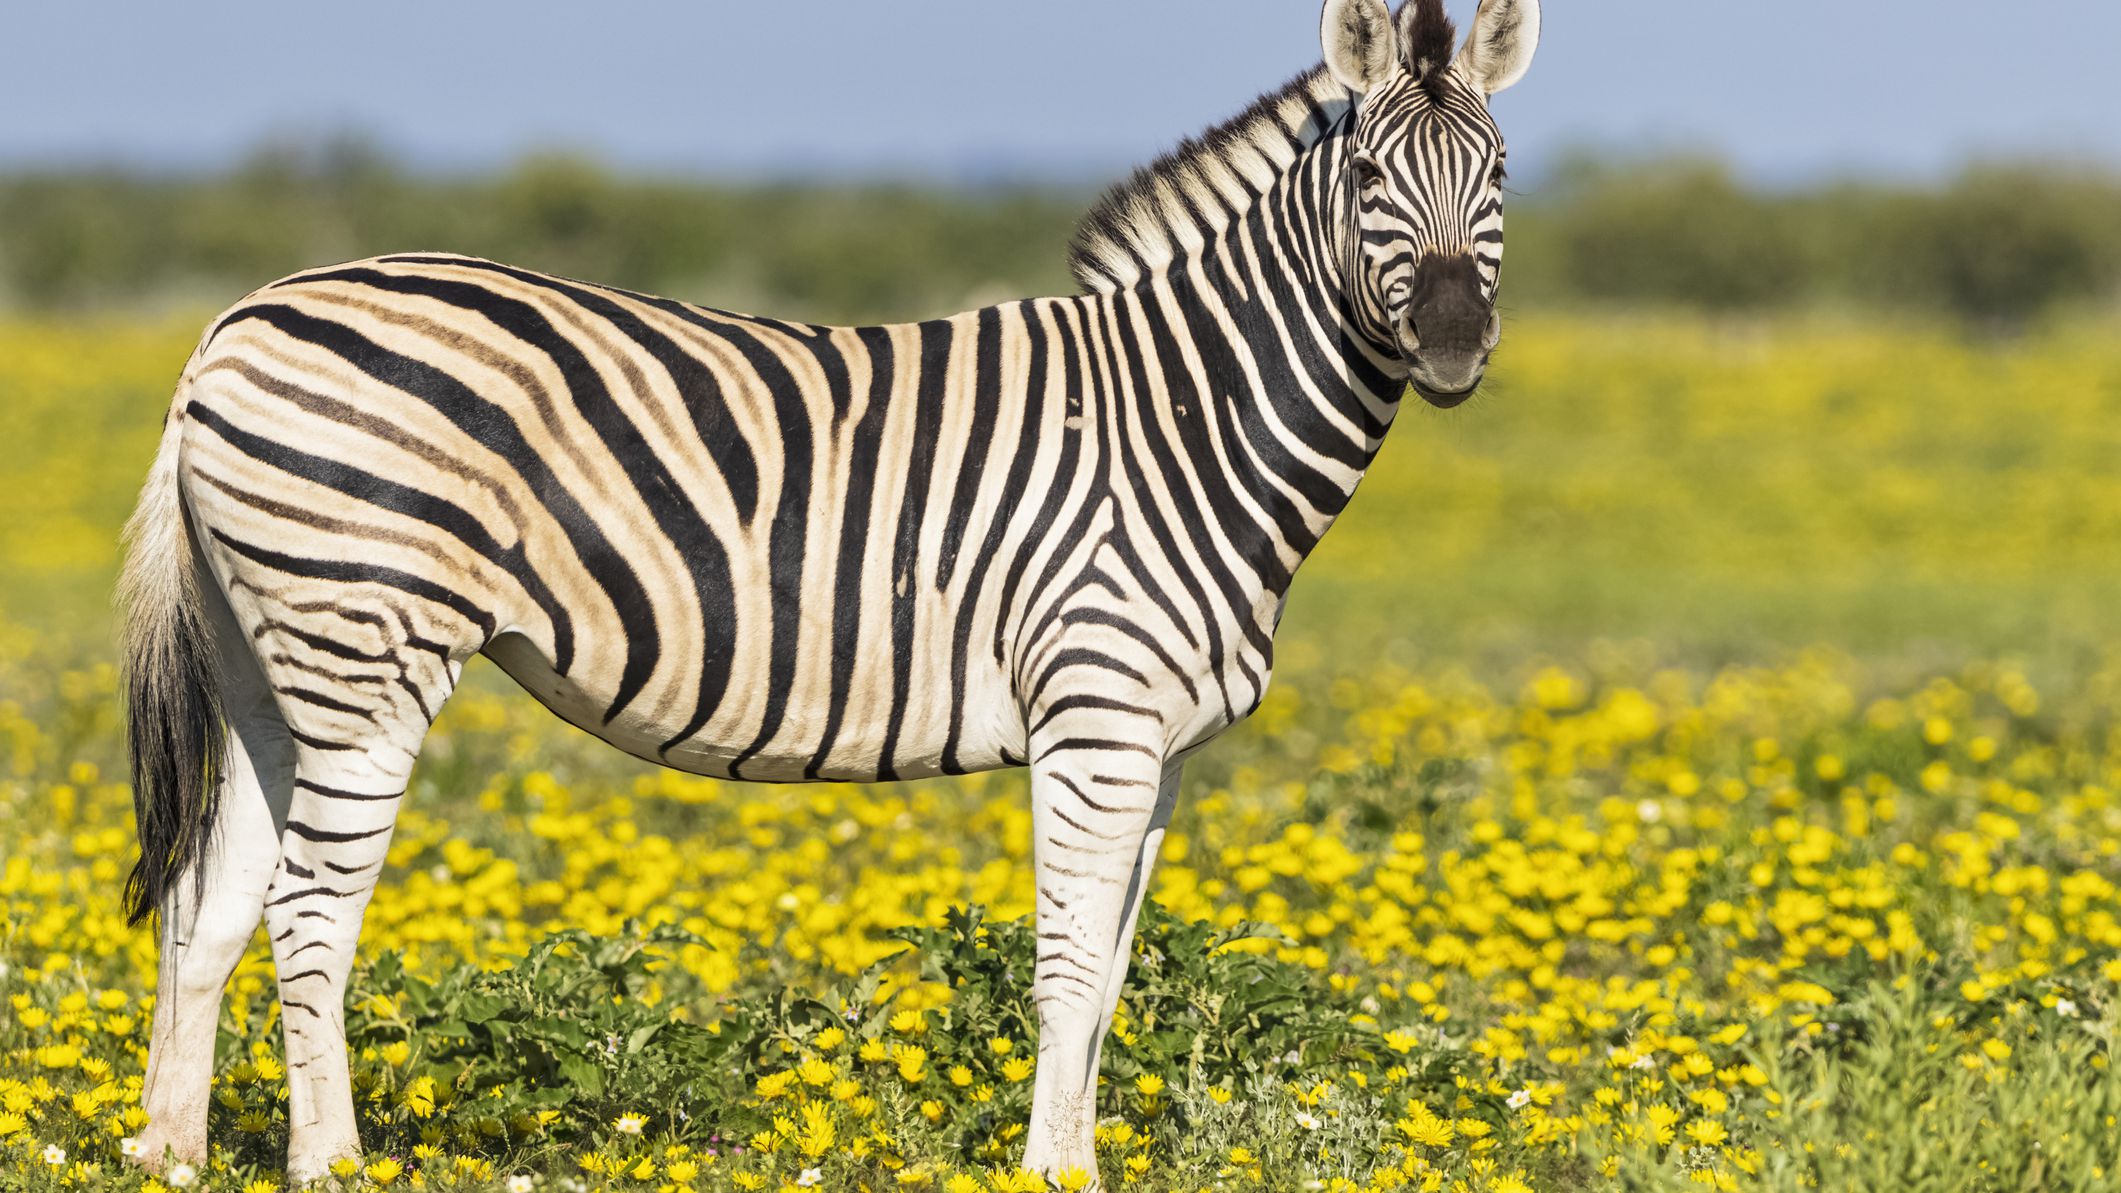 What are 5 interesting facts about zebras?